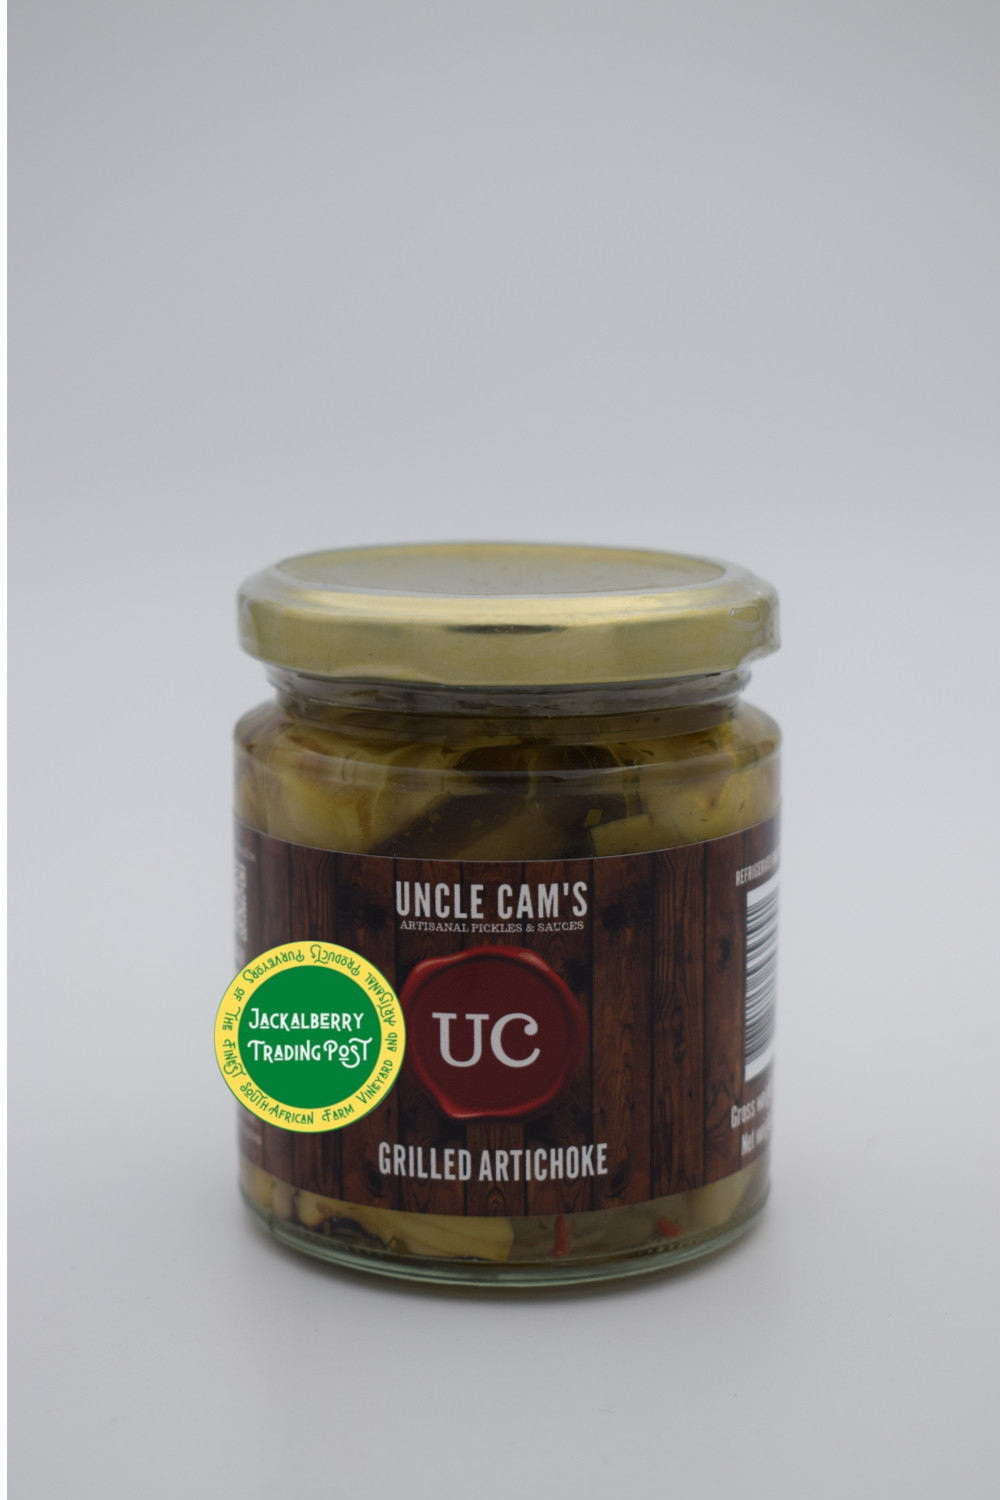 Uncle Cam's Artisanal Pickles And Sauce's Grilled Artichoke